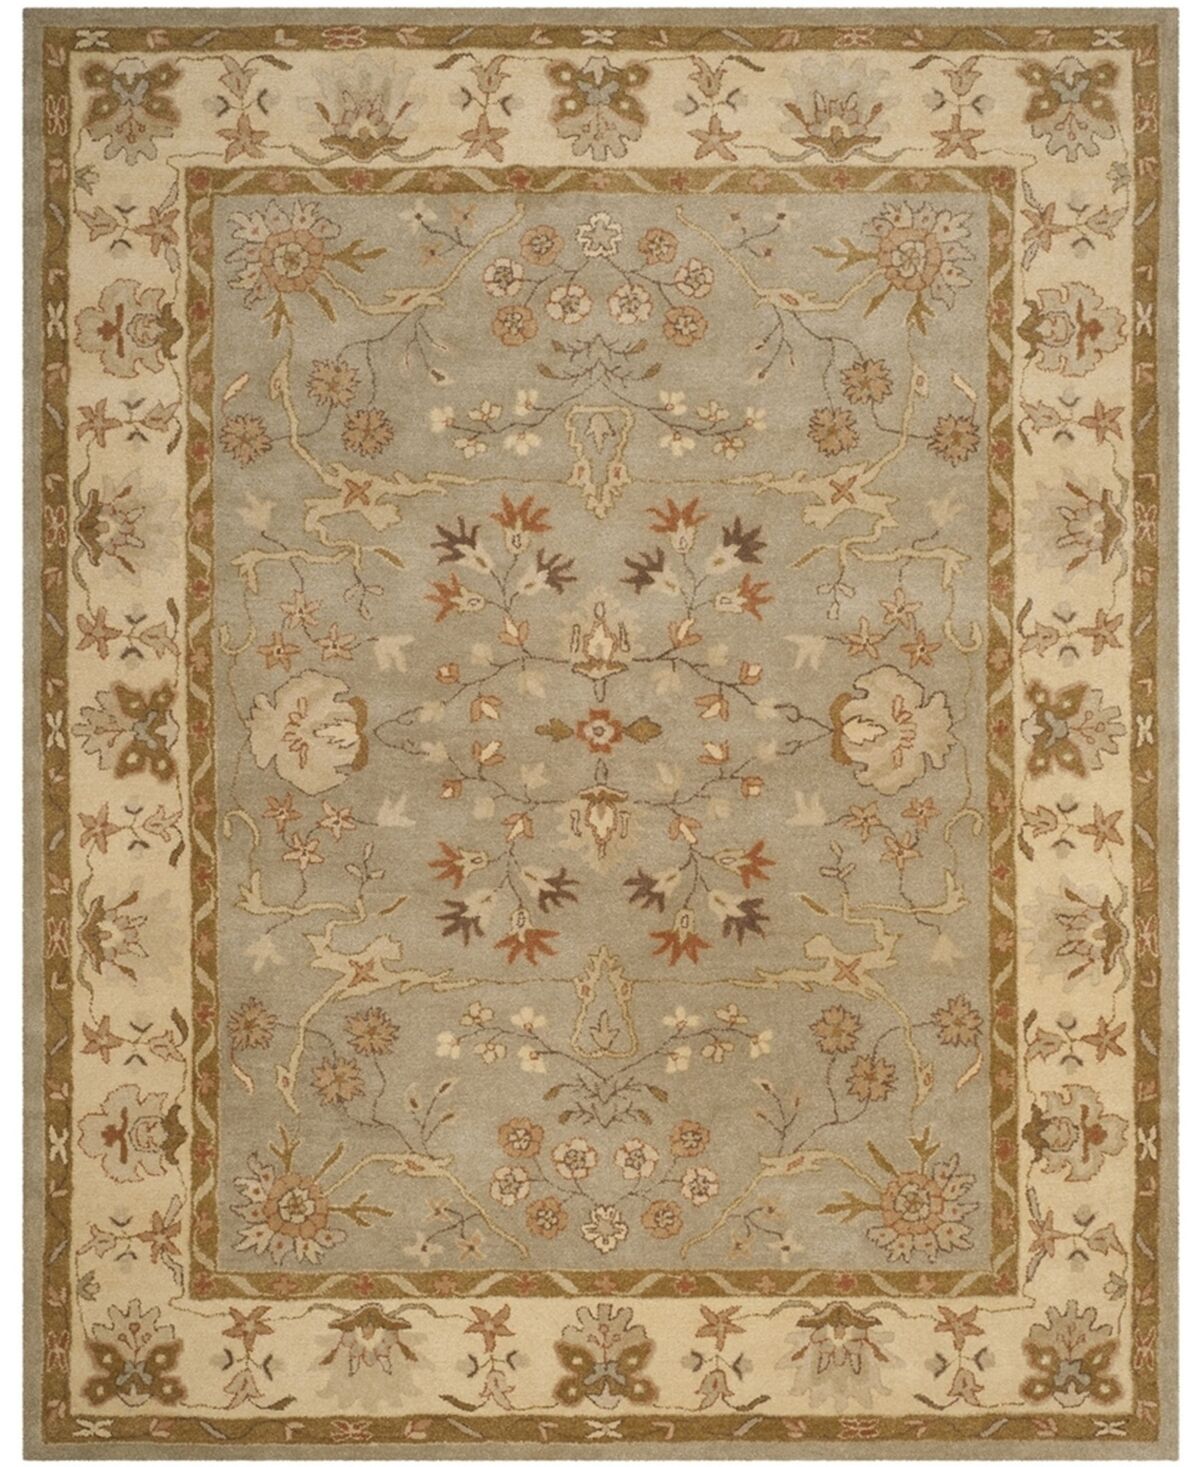 Safavieh Antiquity At62 Silver 8' x 10' Area Rug - Silver